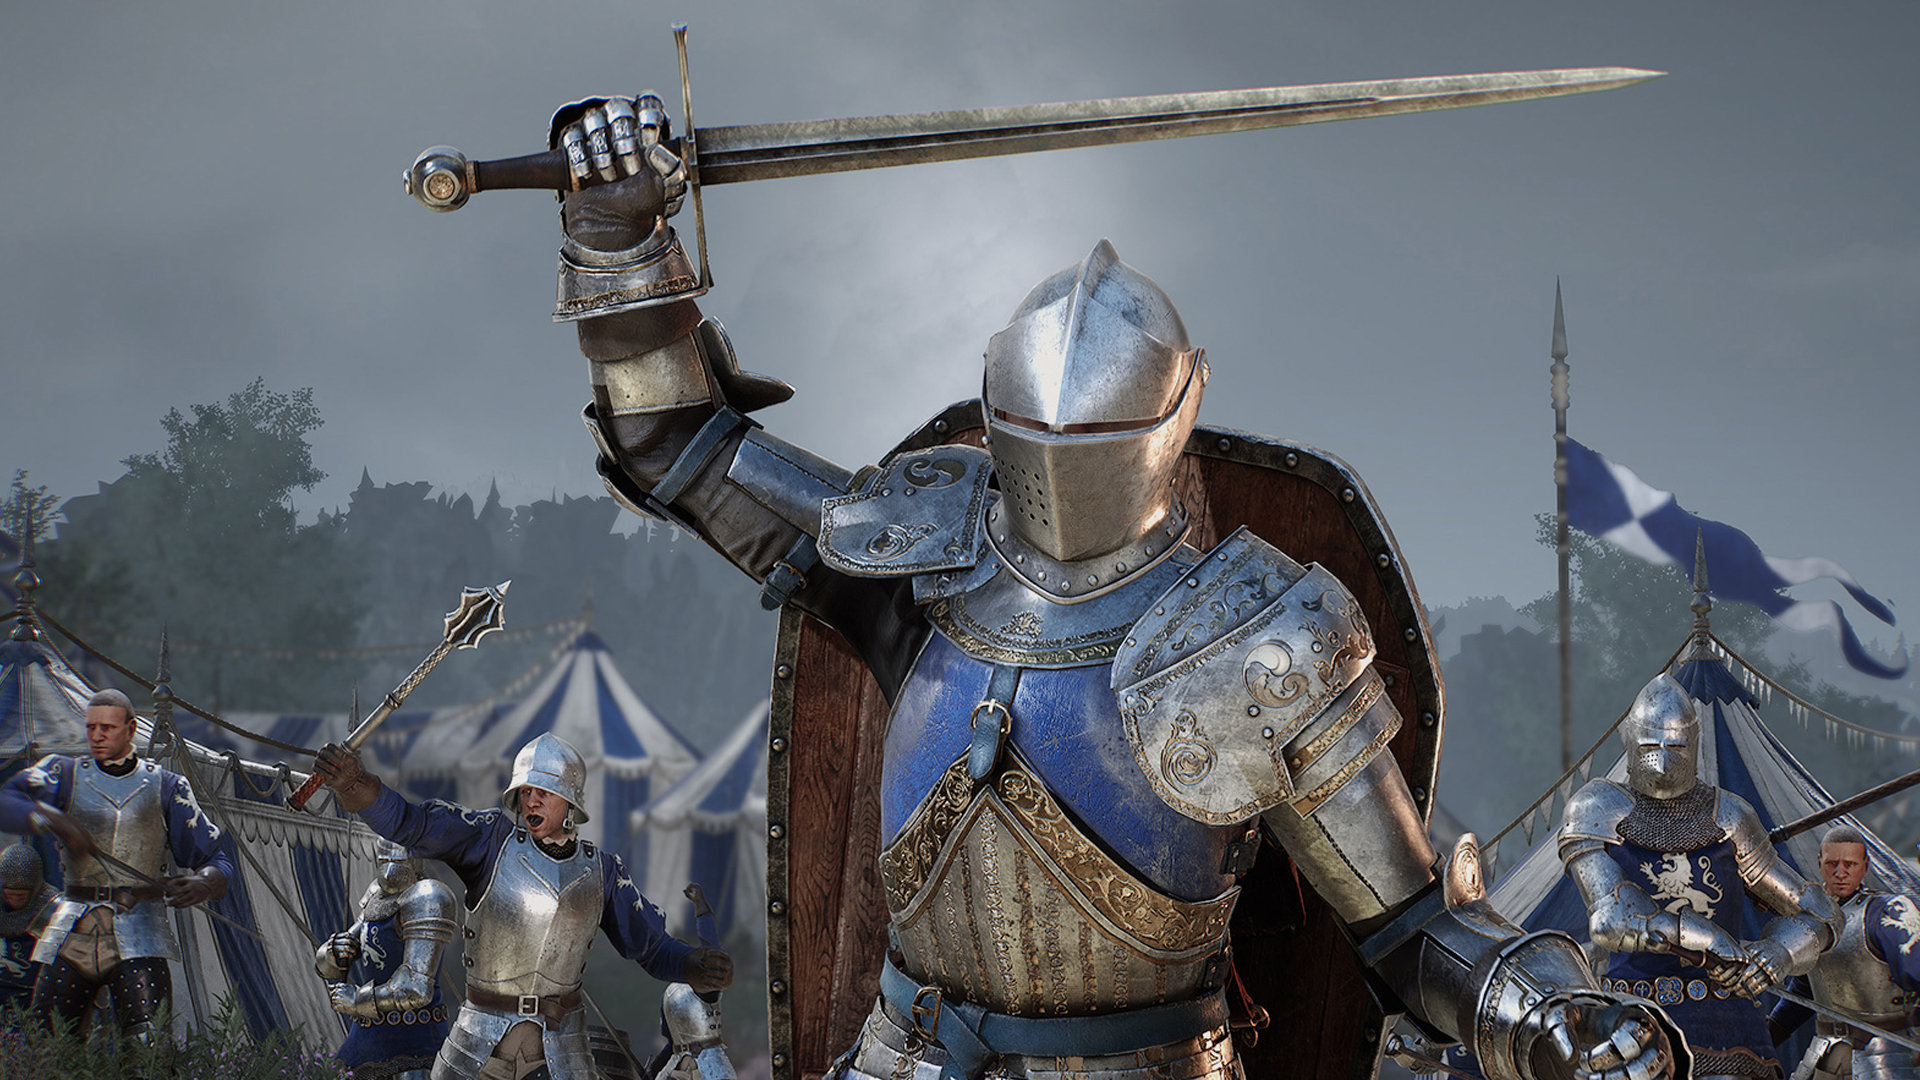  Chivalry 2 combat guide: Everything you need to be a master soldier 